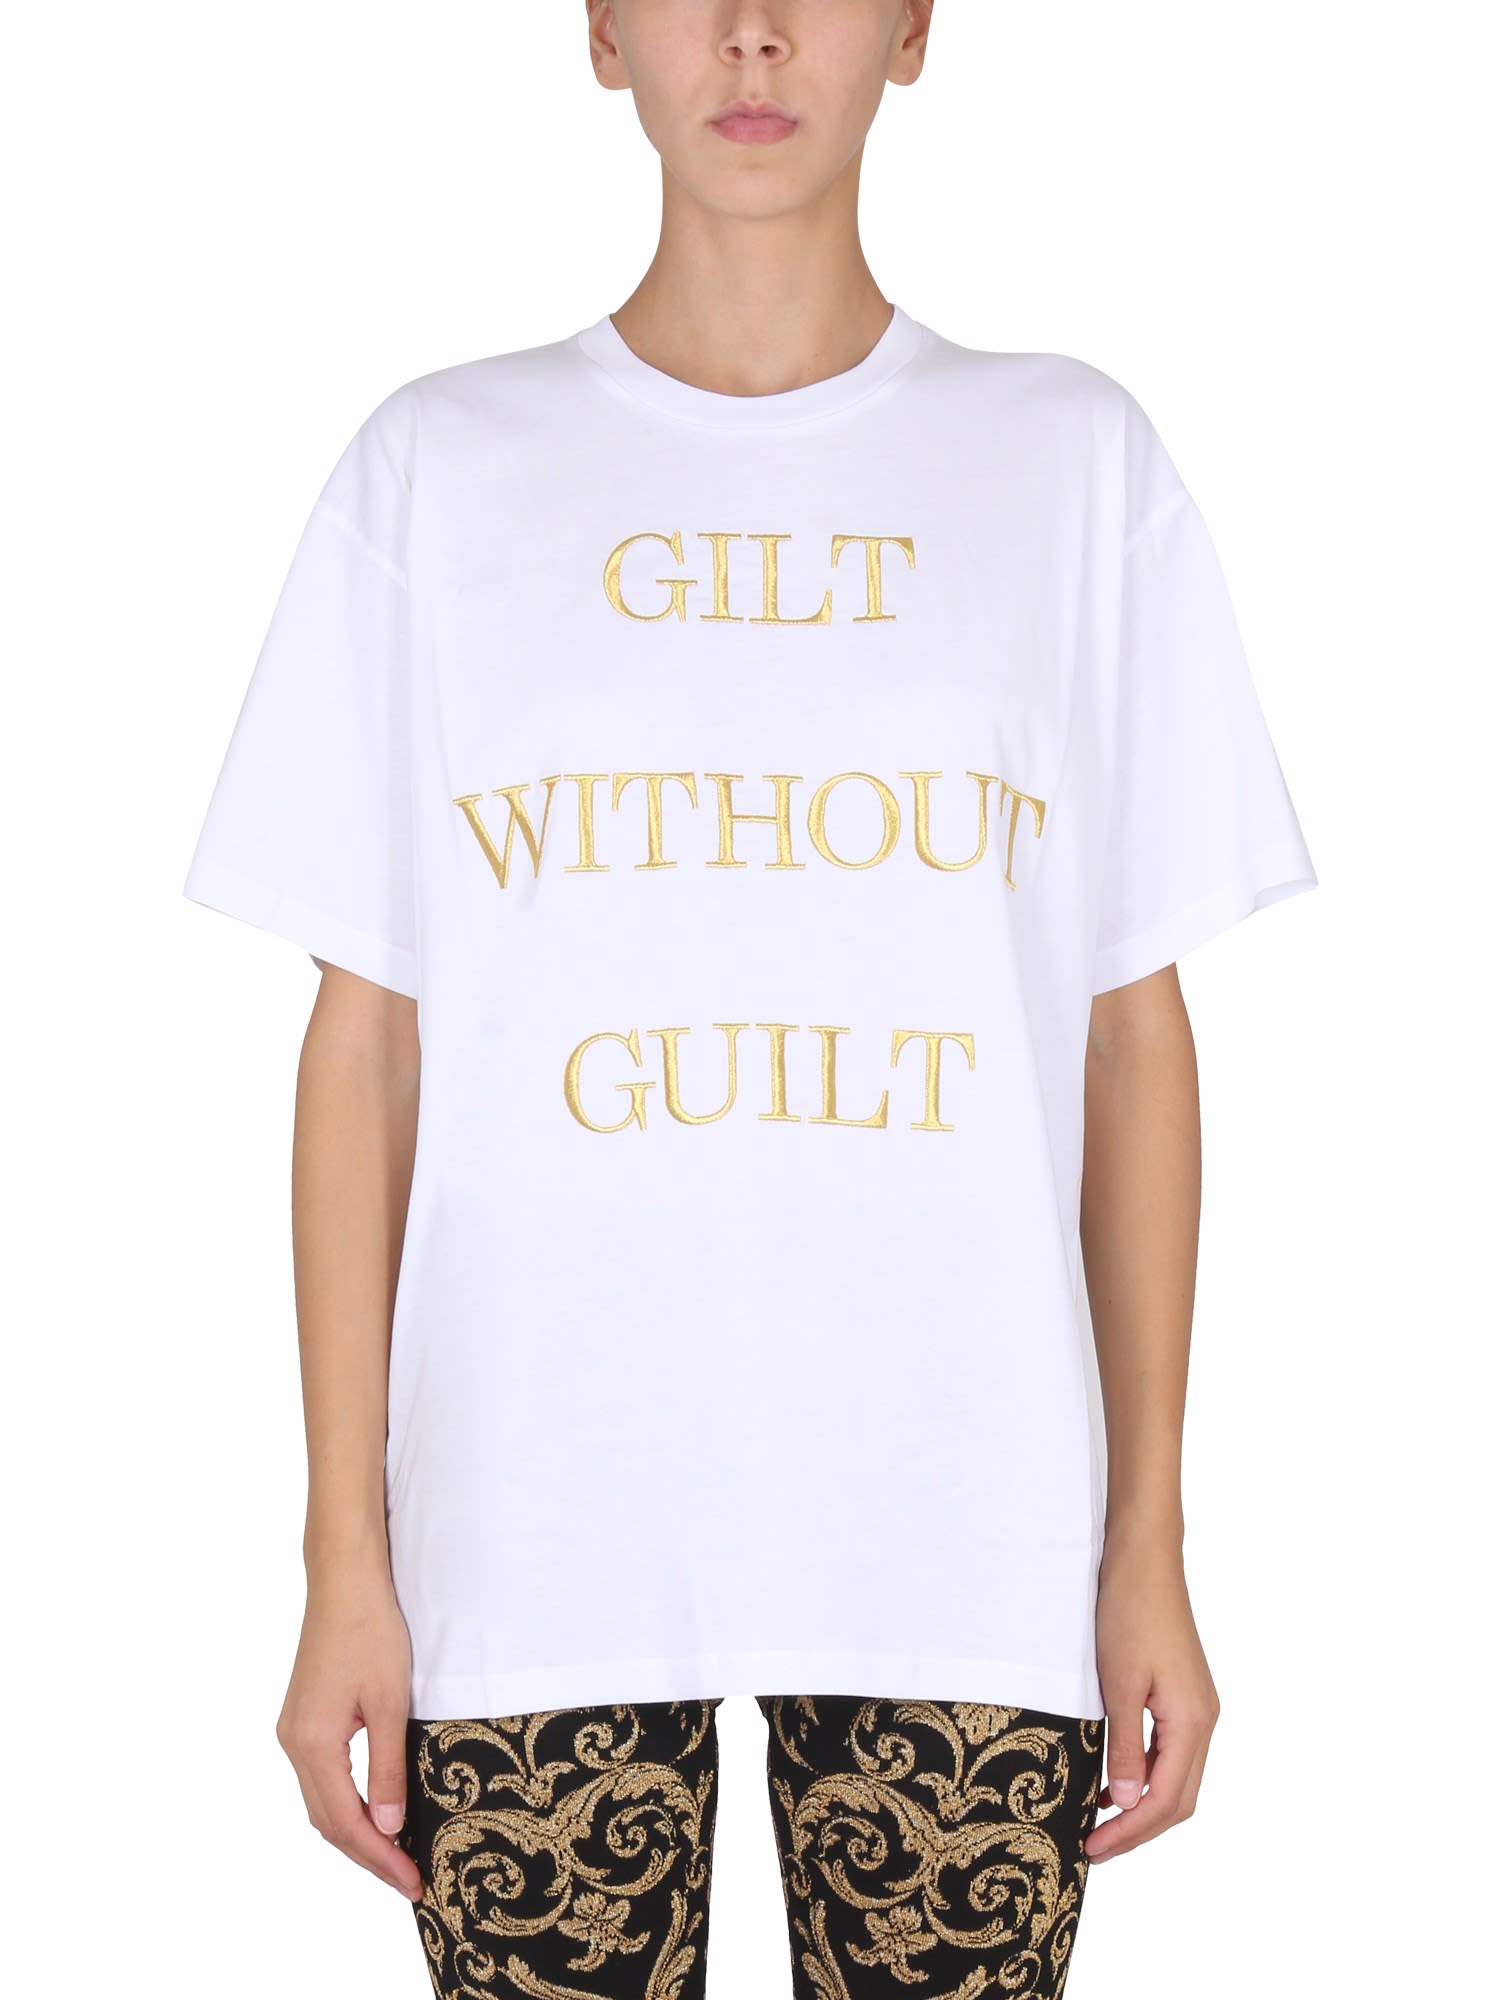 Moschino Guilt Without Guilt T-shirt